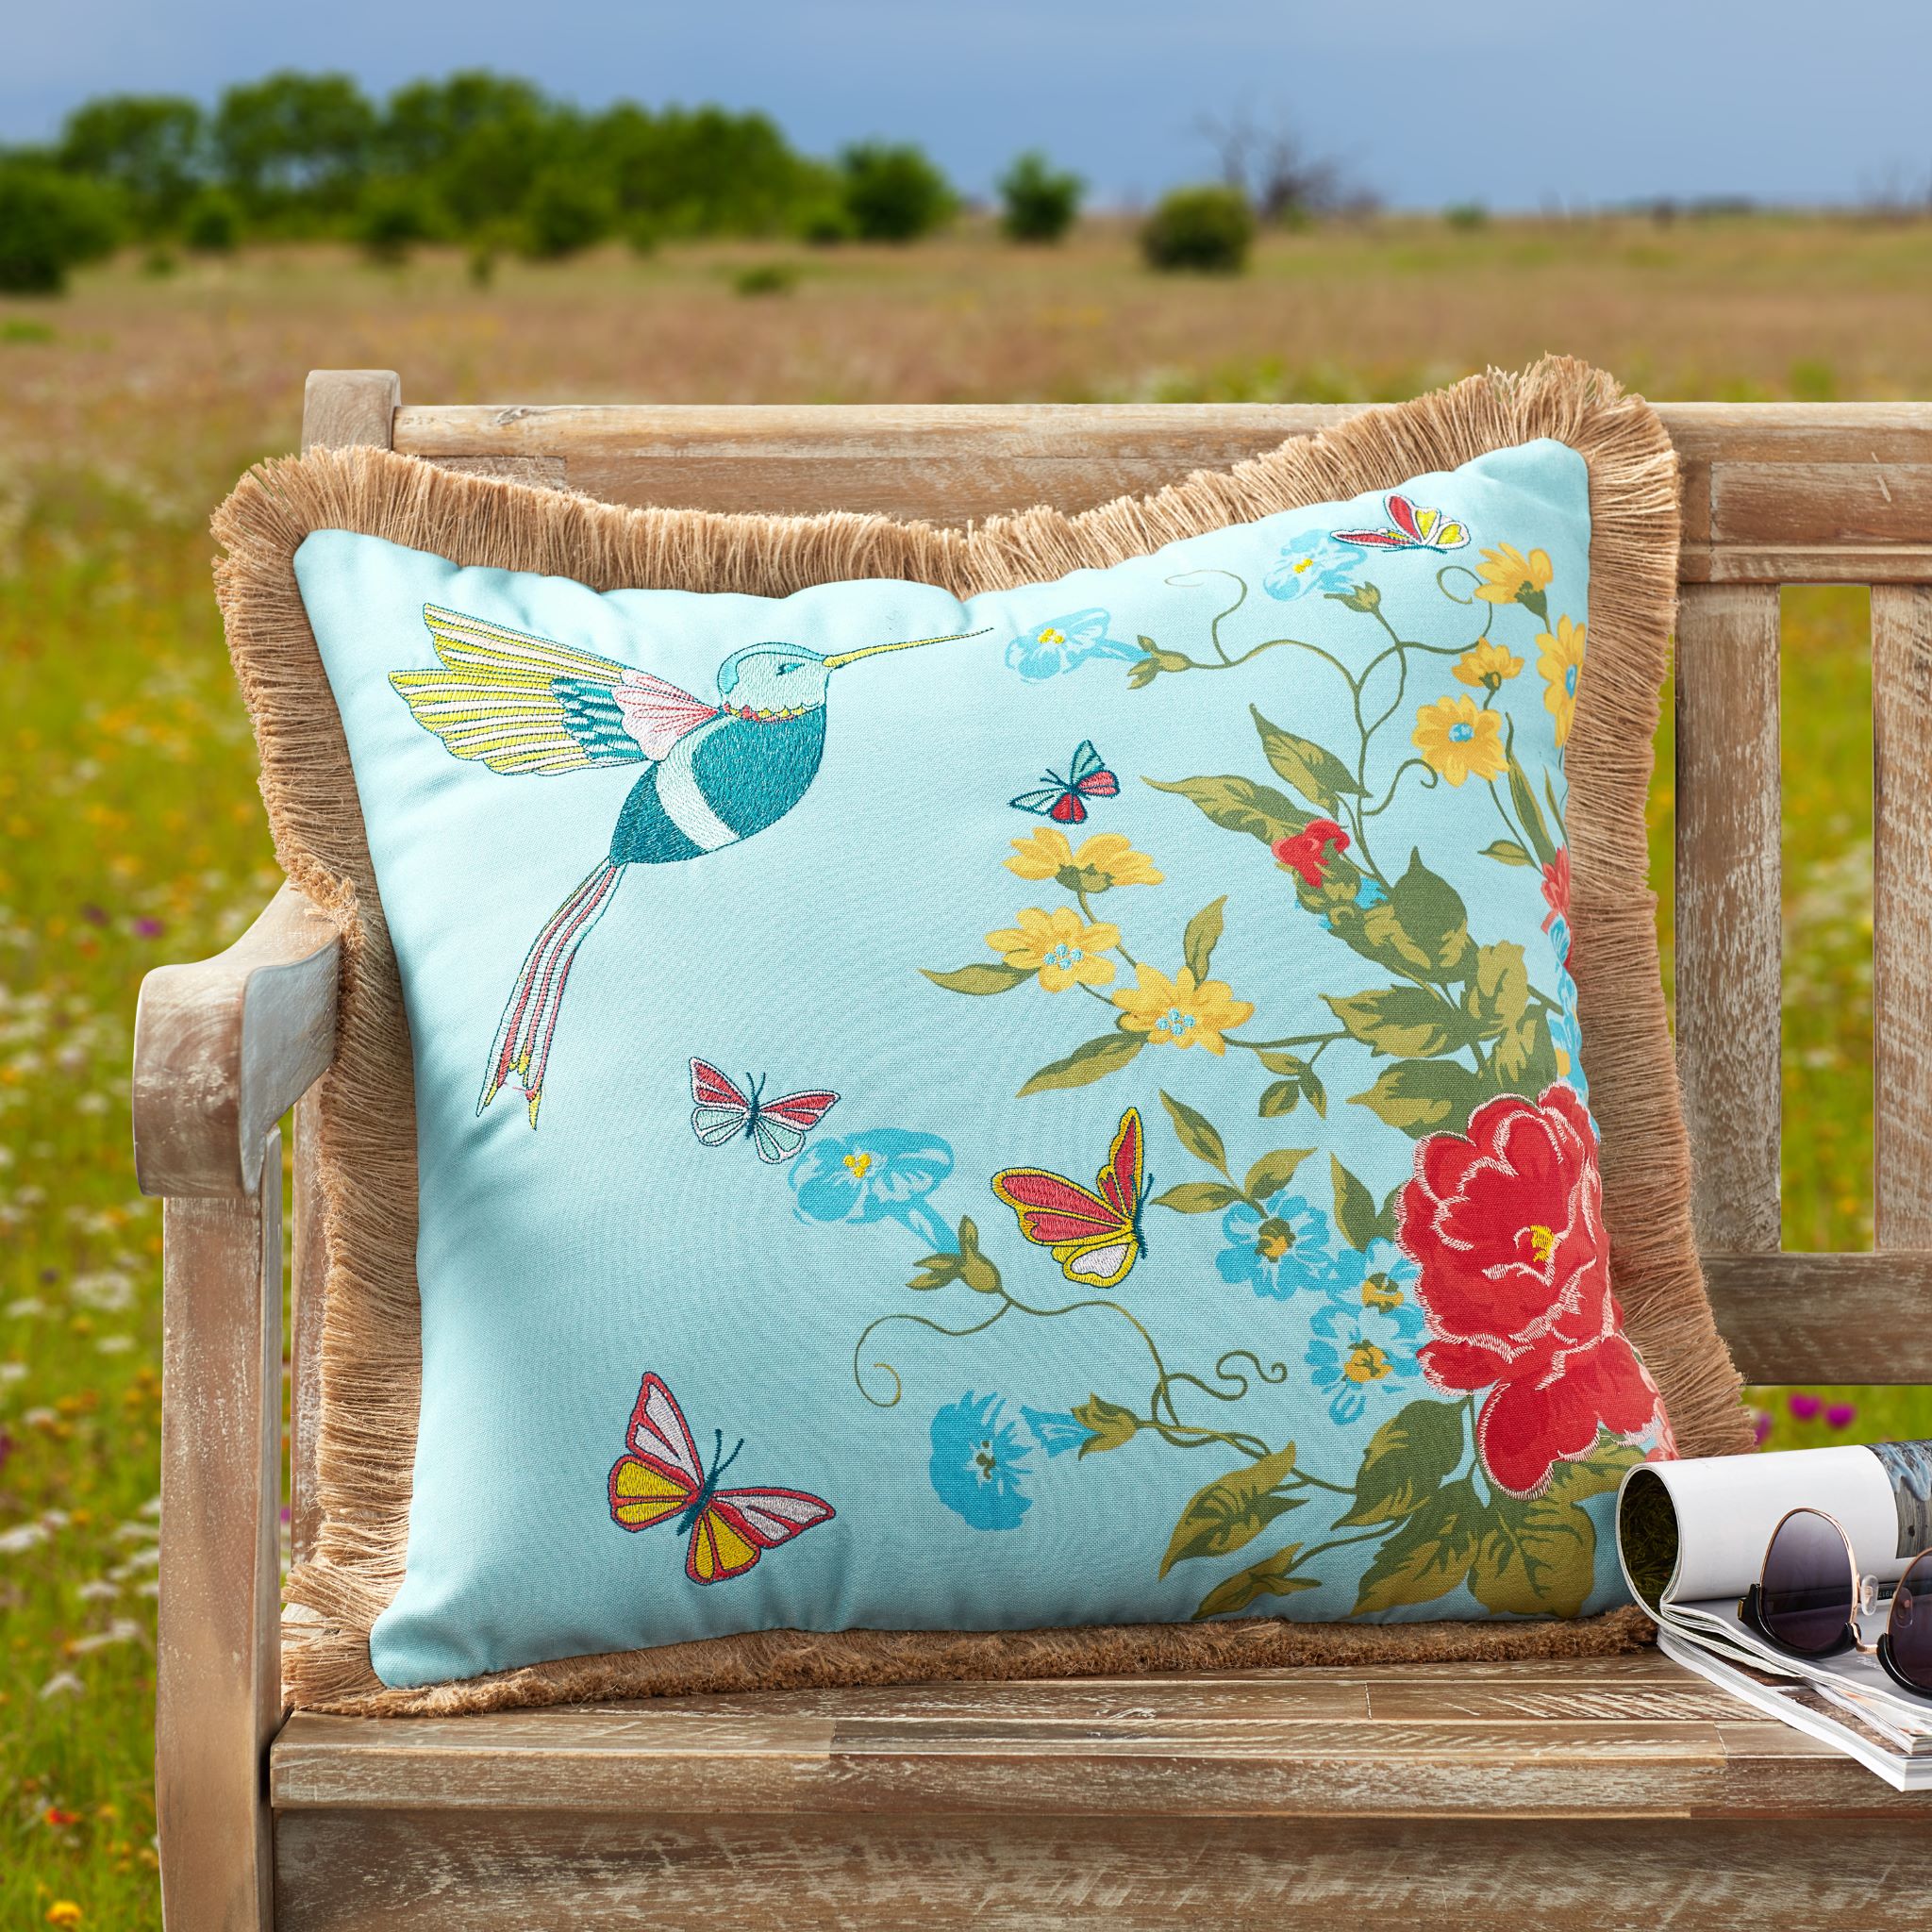 The Pioneer Woman Sweet Rose Embroidered Bird Outdoor Pillow, 20" x 20" - image 5 of 6